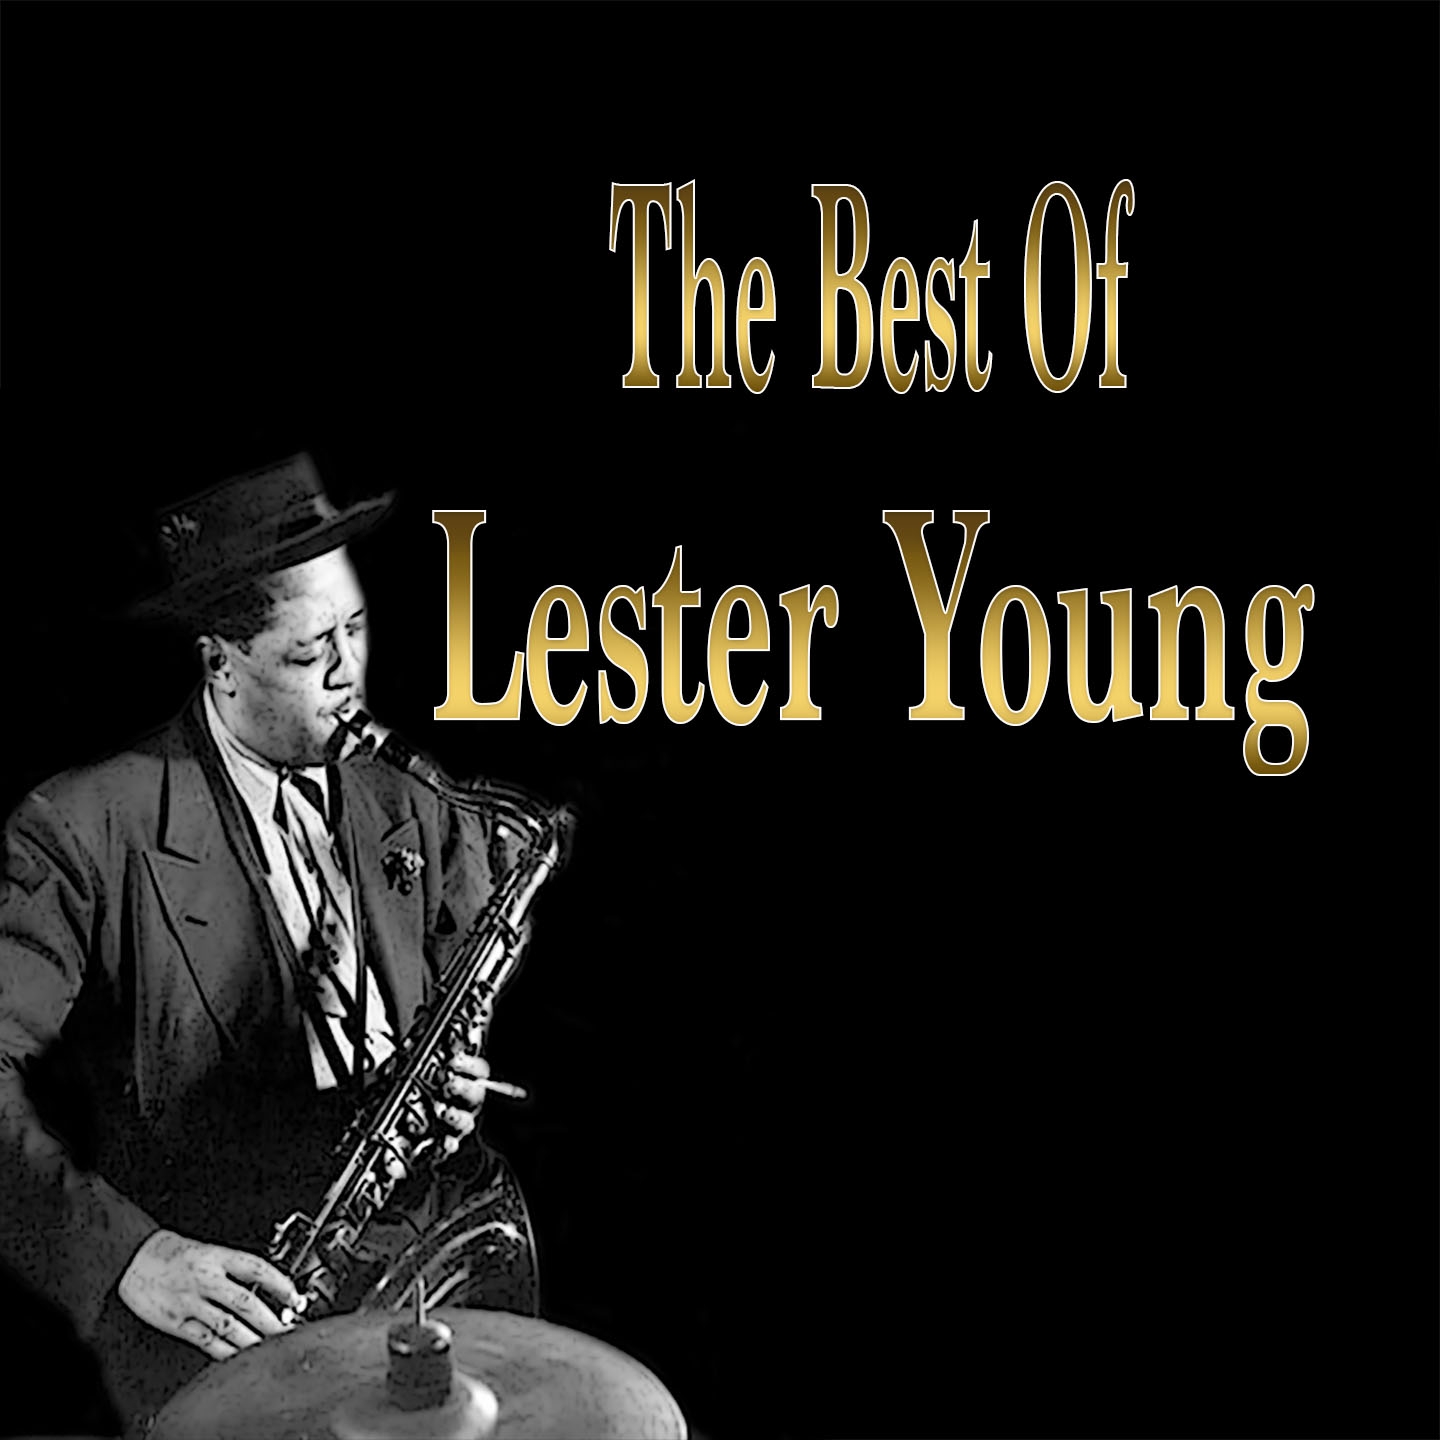 The Best of Lester Young - Just You Just Me, I Never Knew, And 20 Other Hits